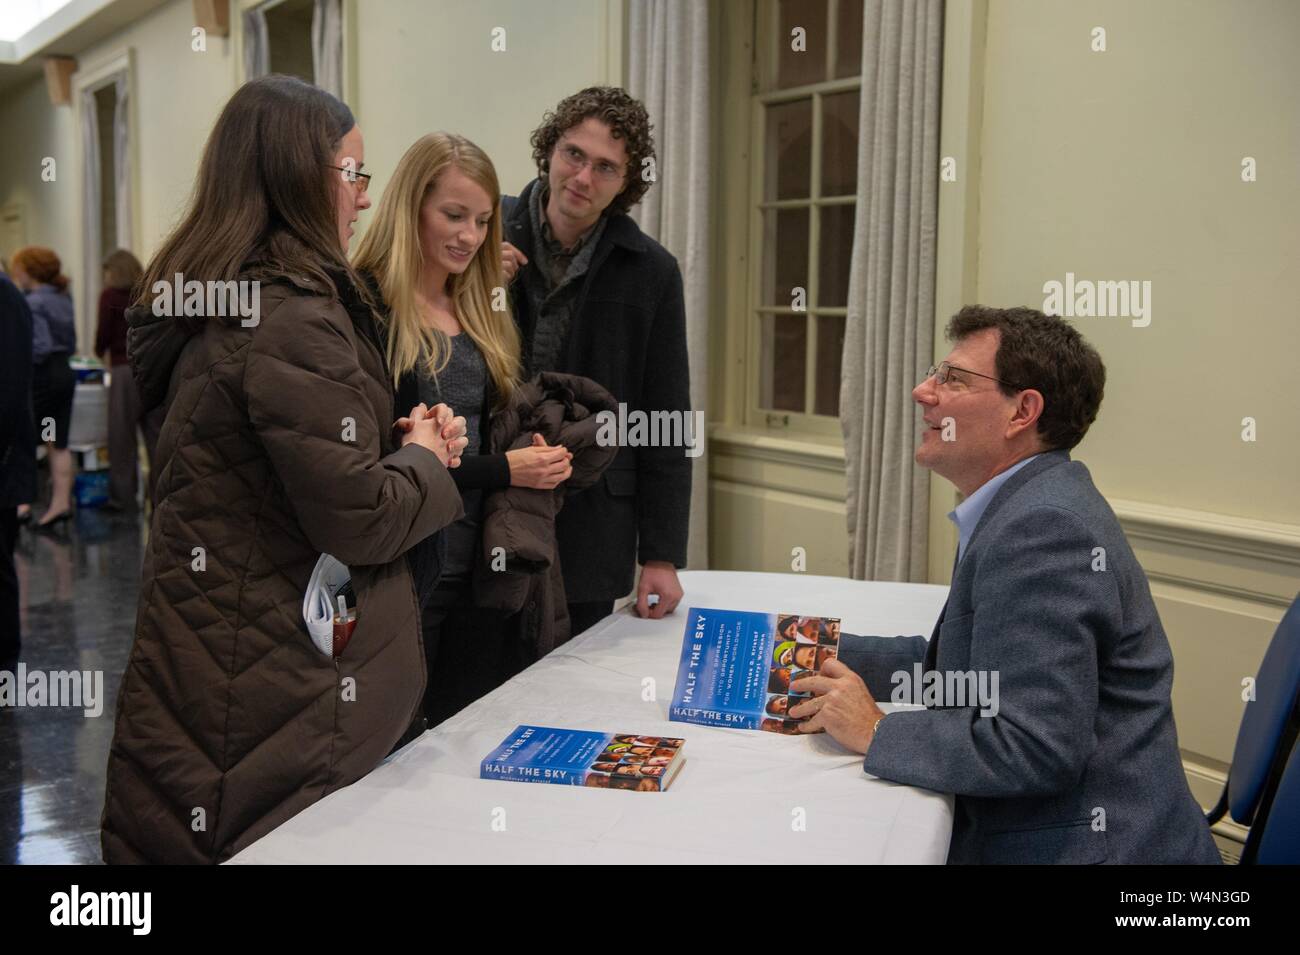 Journalist Nicholas Kristof speaks with students during a Foreign Affairs symposium at the Johns Hopkins University in Baltimore, Maryland, February 2, 2010. From the Homewood Photography collection. () Stock Photo